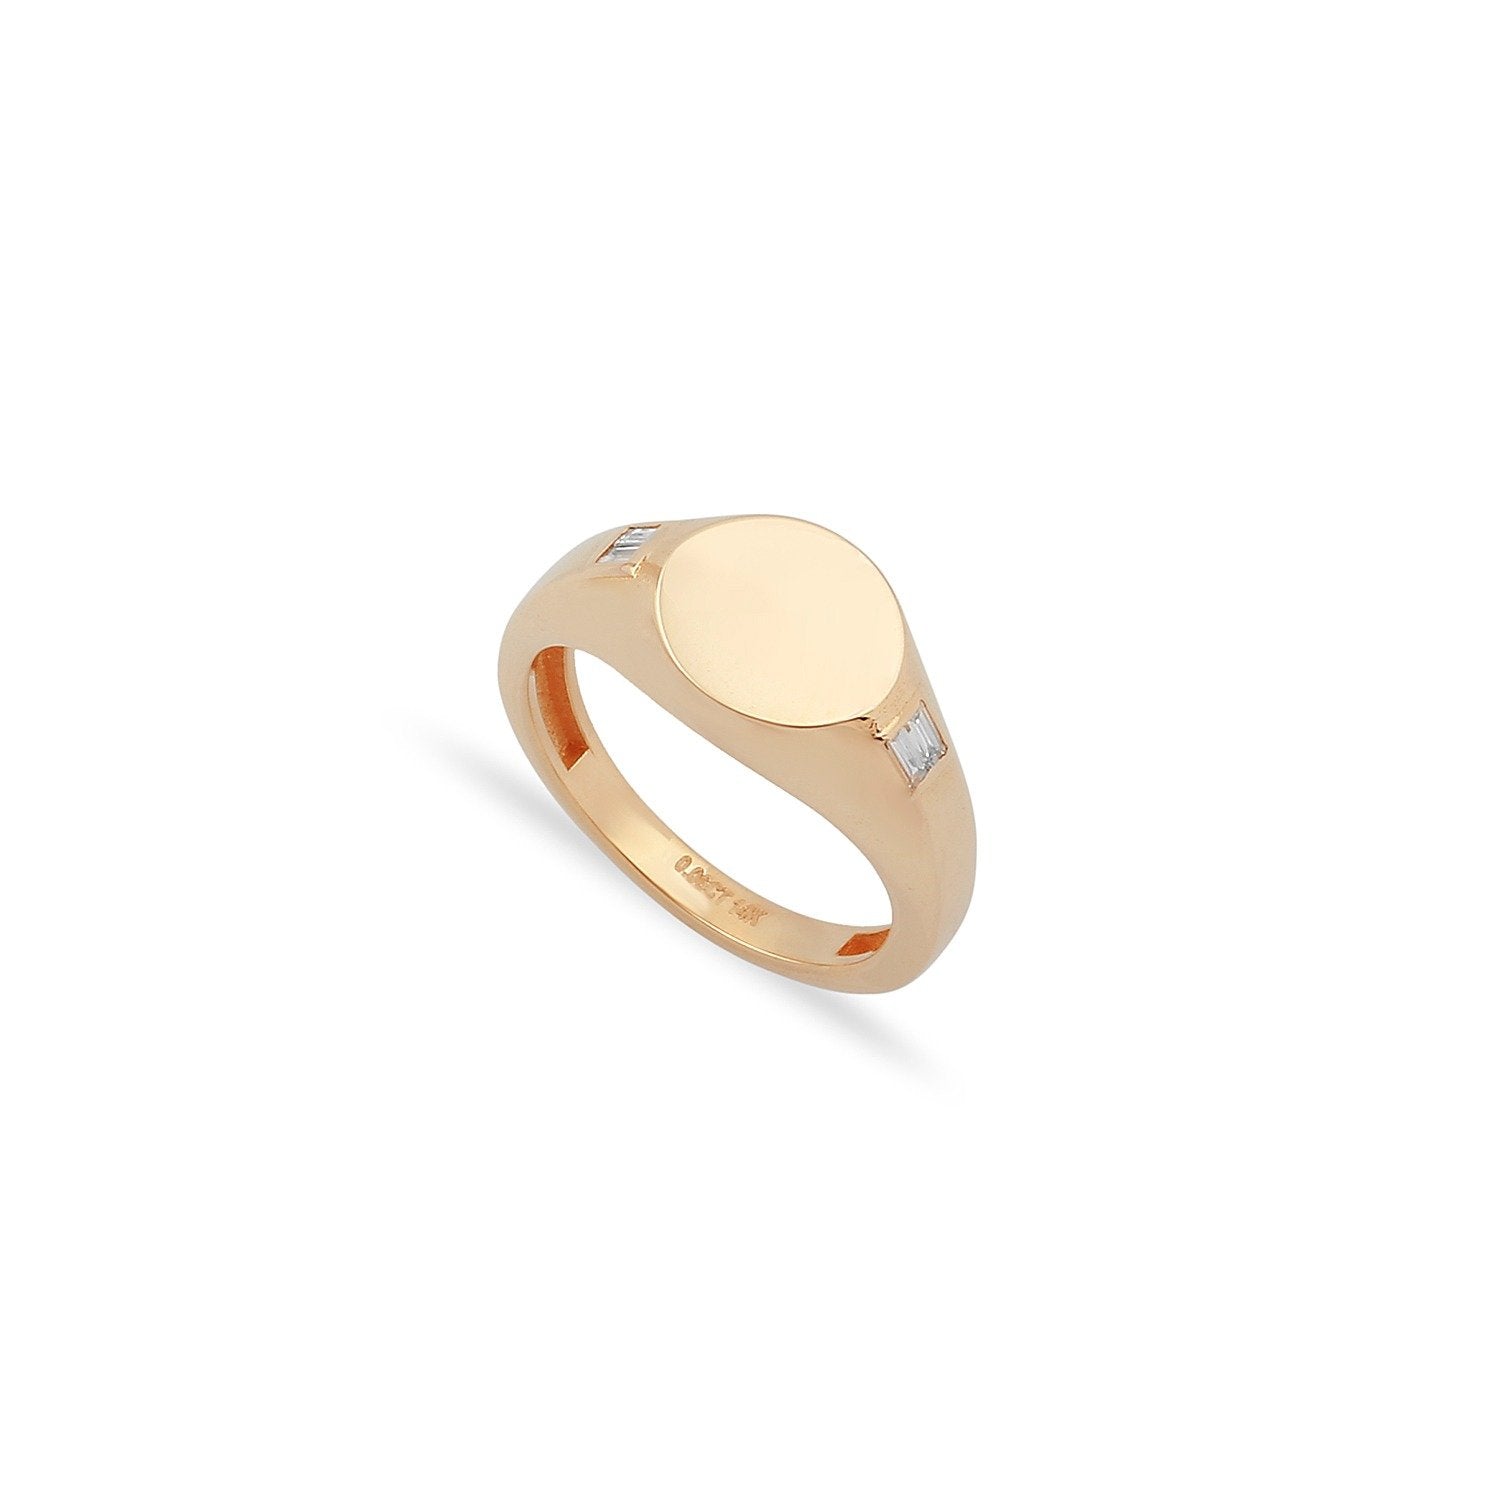 TSK Diamond Accent Signet Pinky Ring JEWELRY The Sis Kiss 3 14k Rose Gold